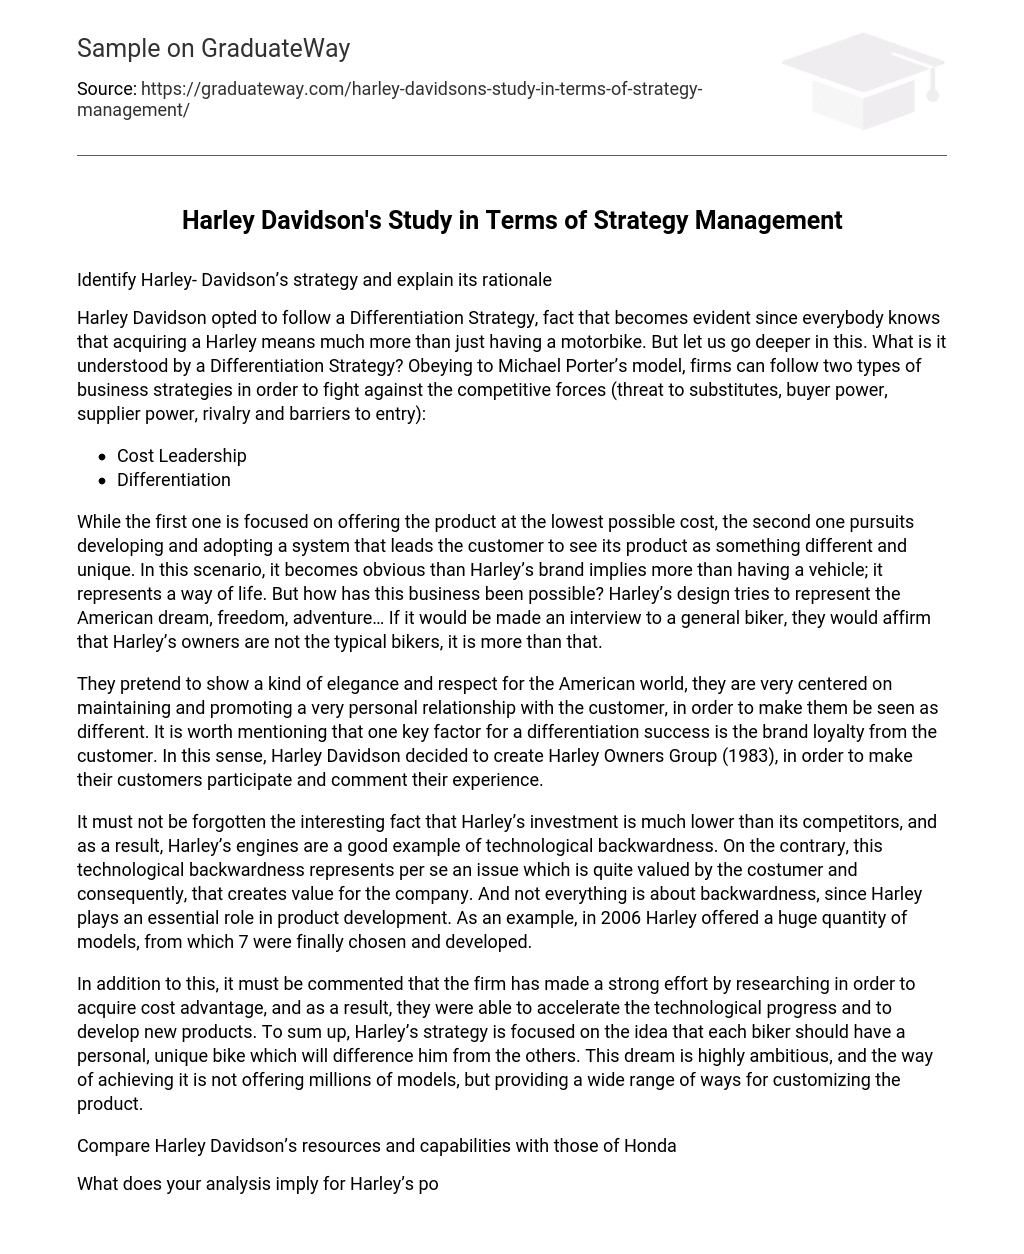 Harley Davidson’s Study in Terms of Strategy Management